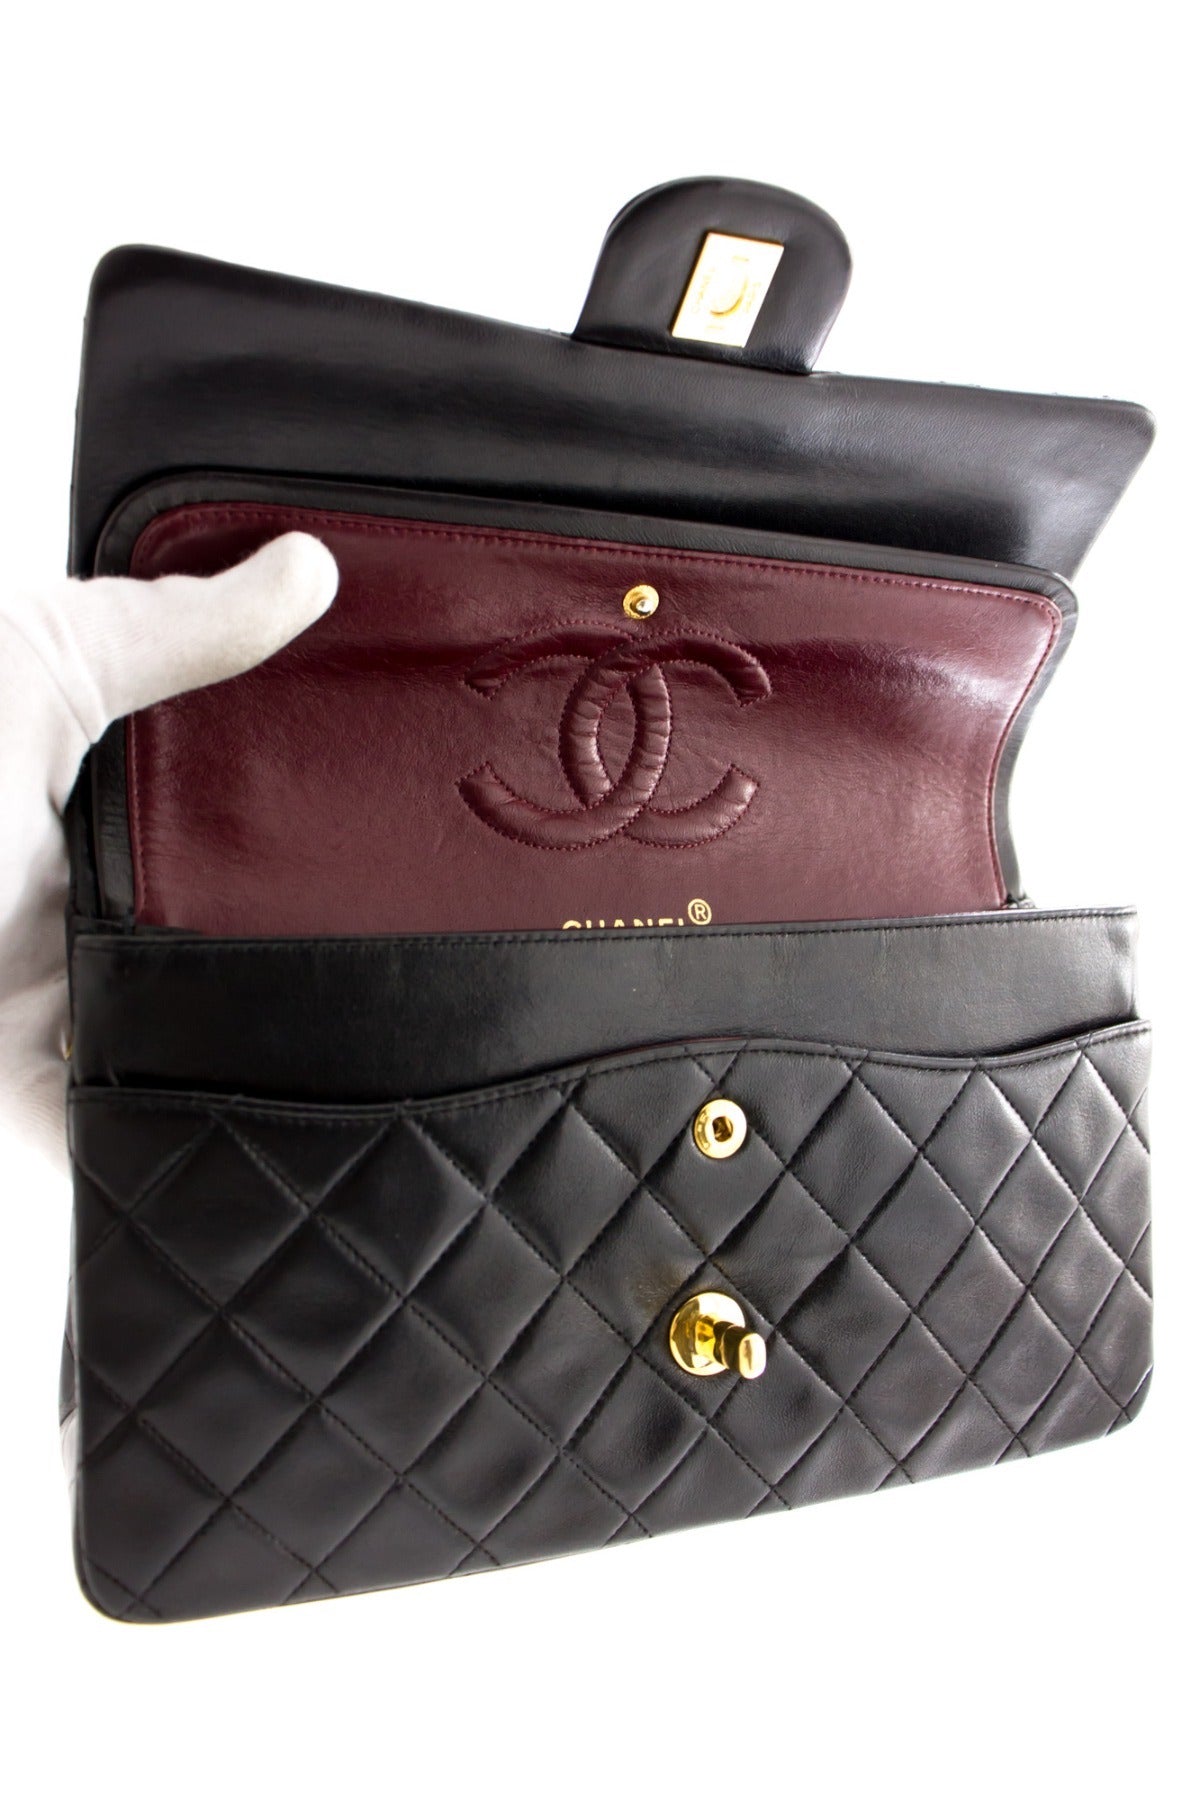 3 best places to buy vintage Chanel bags online - Her World Singapore